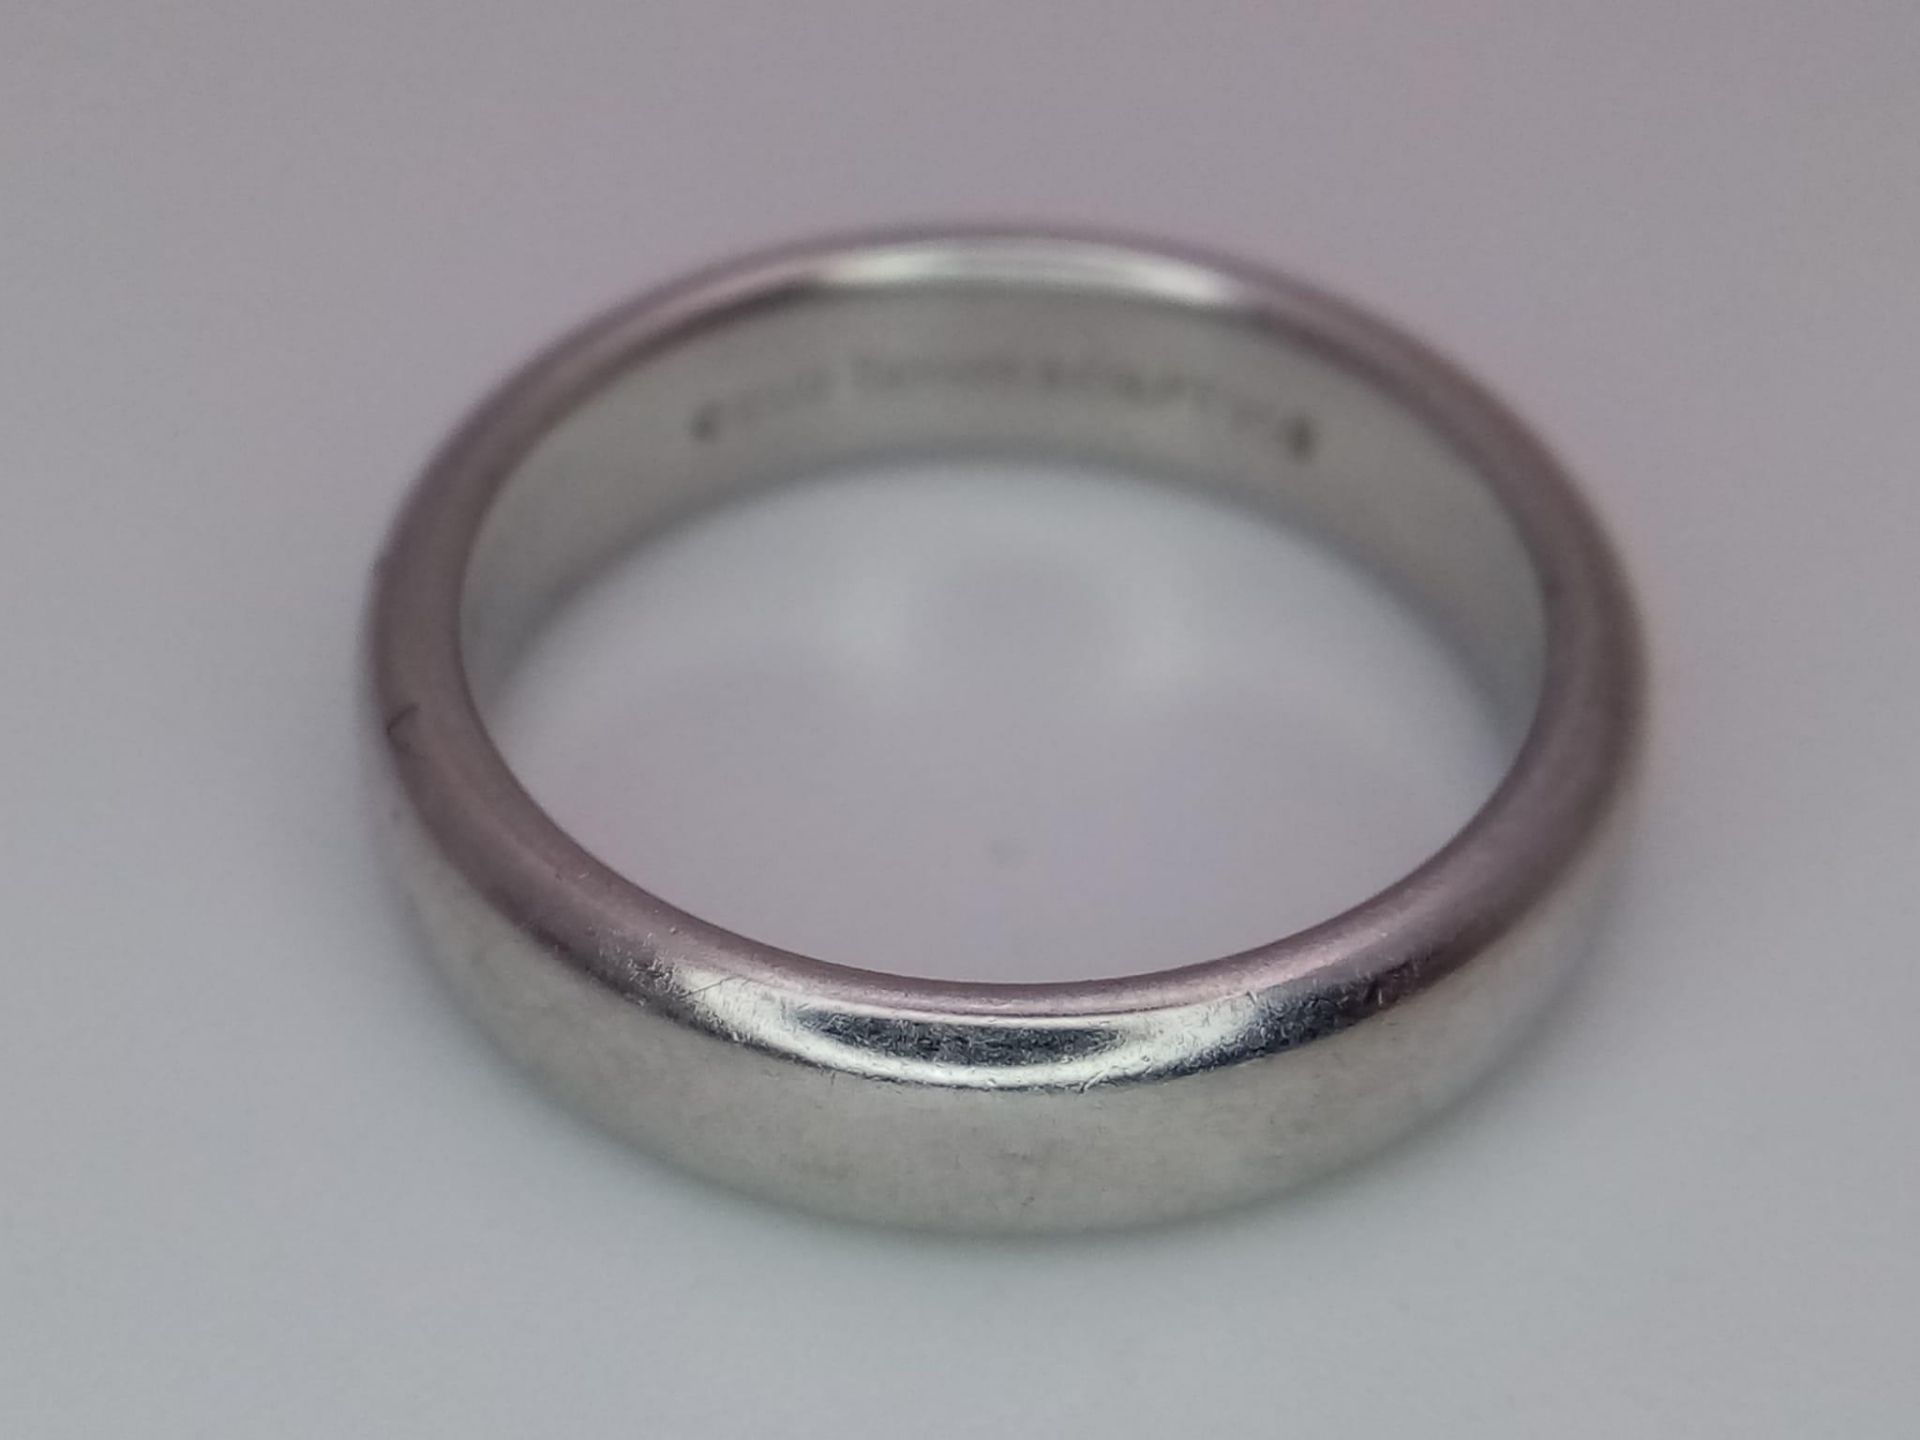 Tiffany and Co Platinum 4mm rounded band ring. 8.2g. Size K. - Image 3 of 4